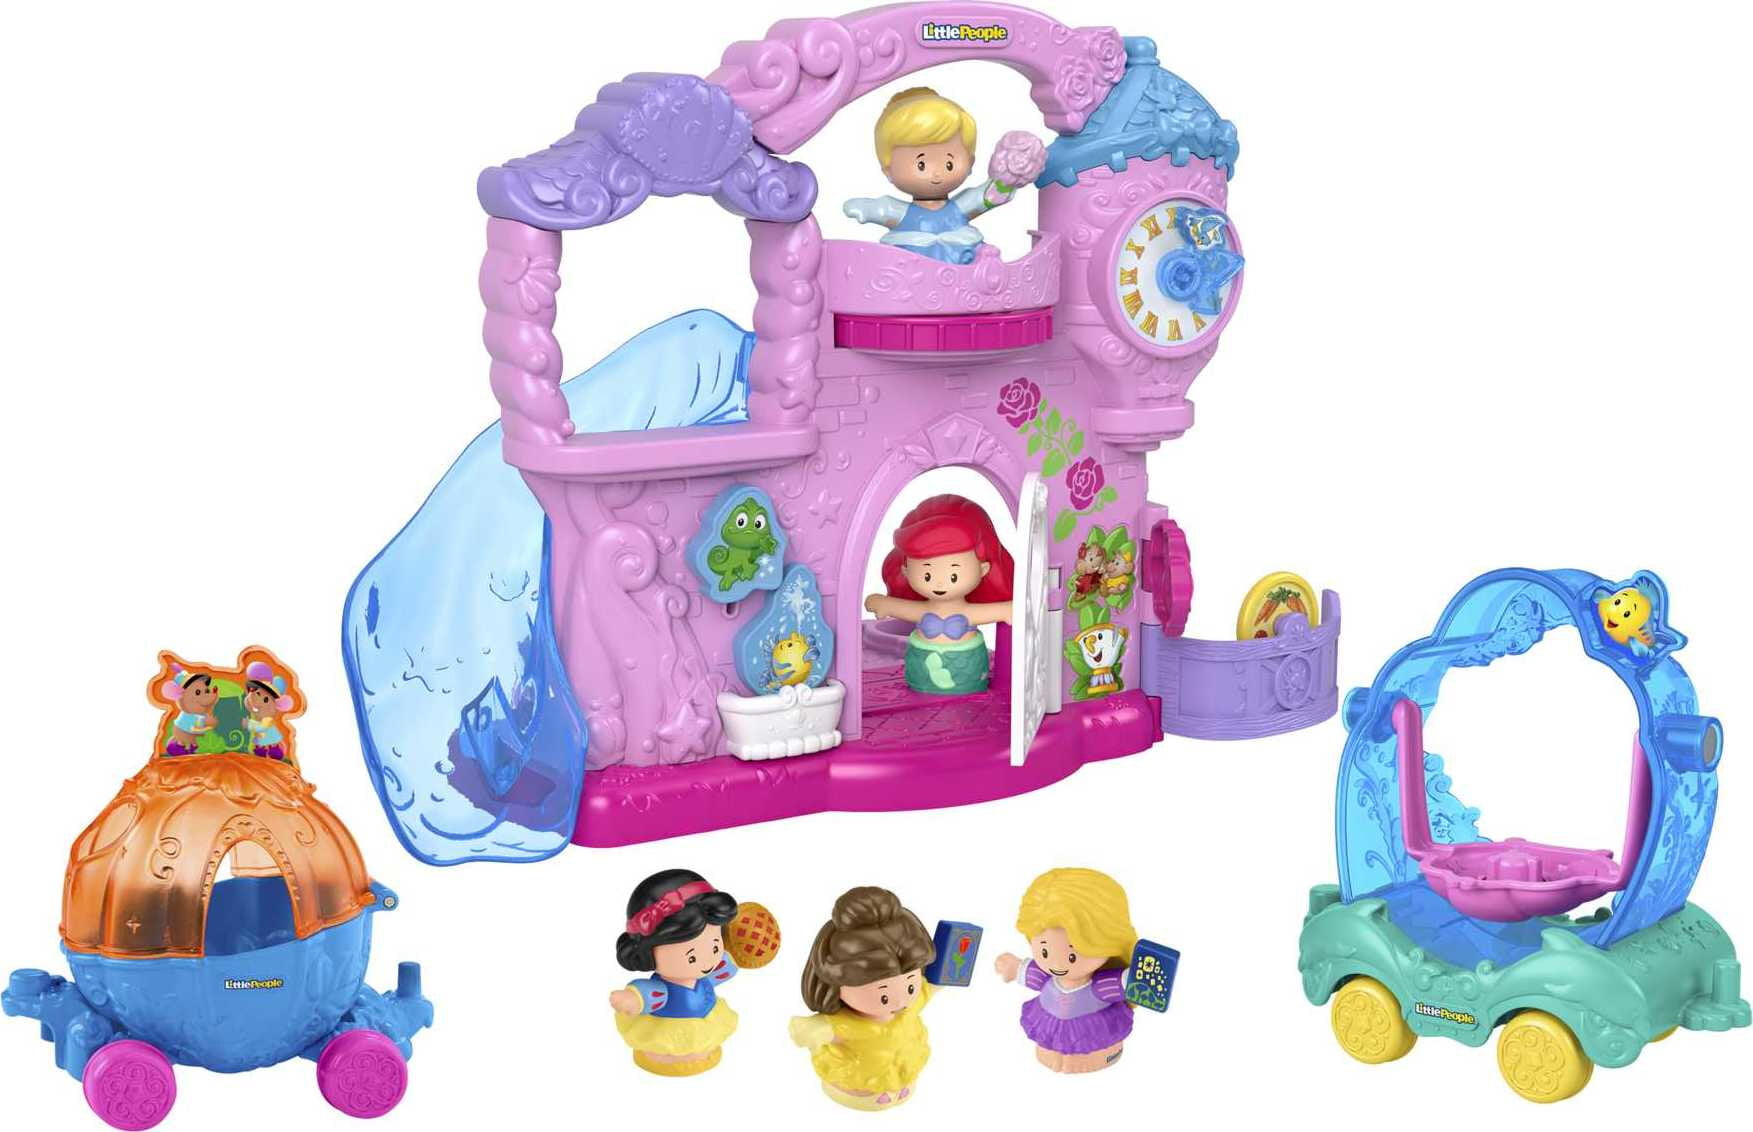 Fisher Price Little People Disney Princess Play Go Castle Set New Kids Toy Gift 